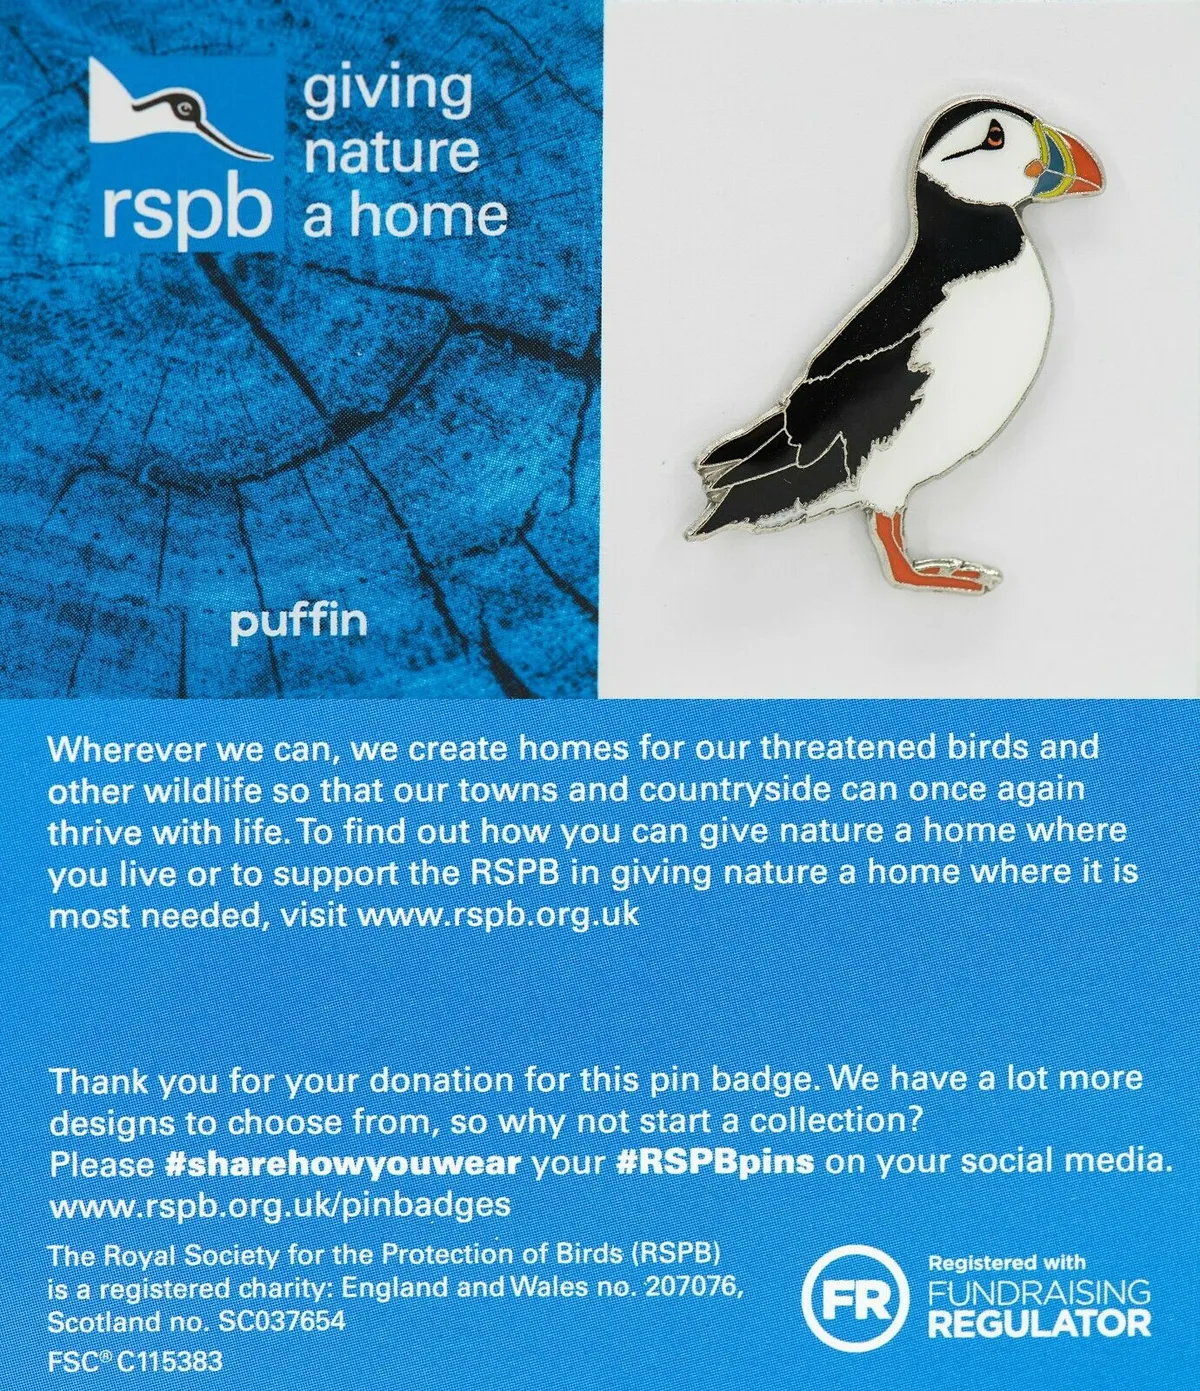 An enamel pin of a puffin, attached to a card with information about the RSPB.